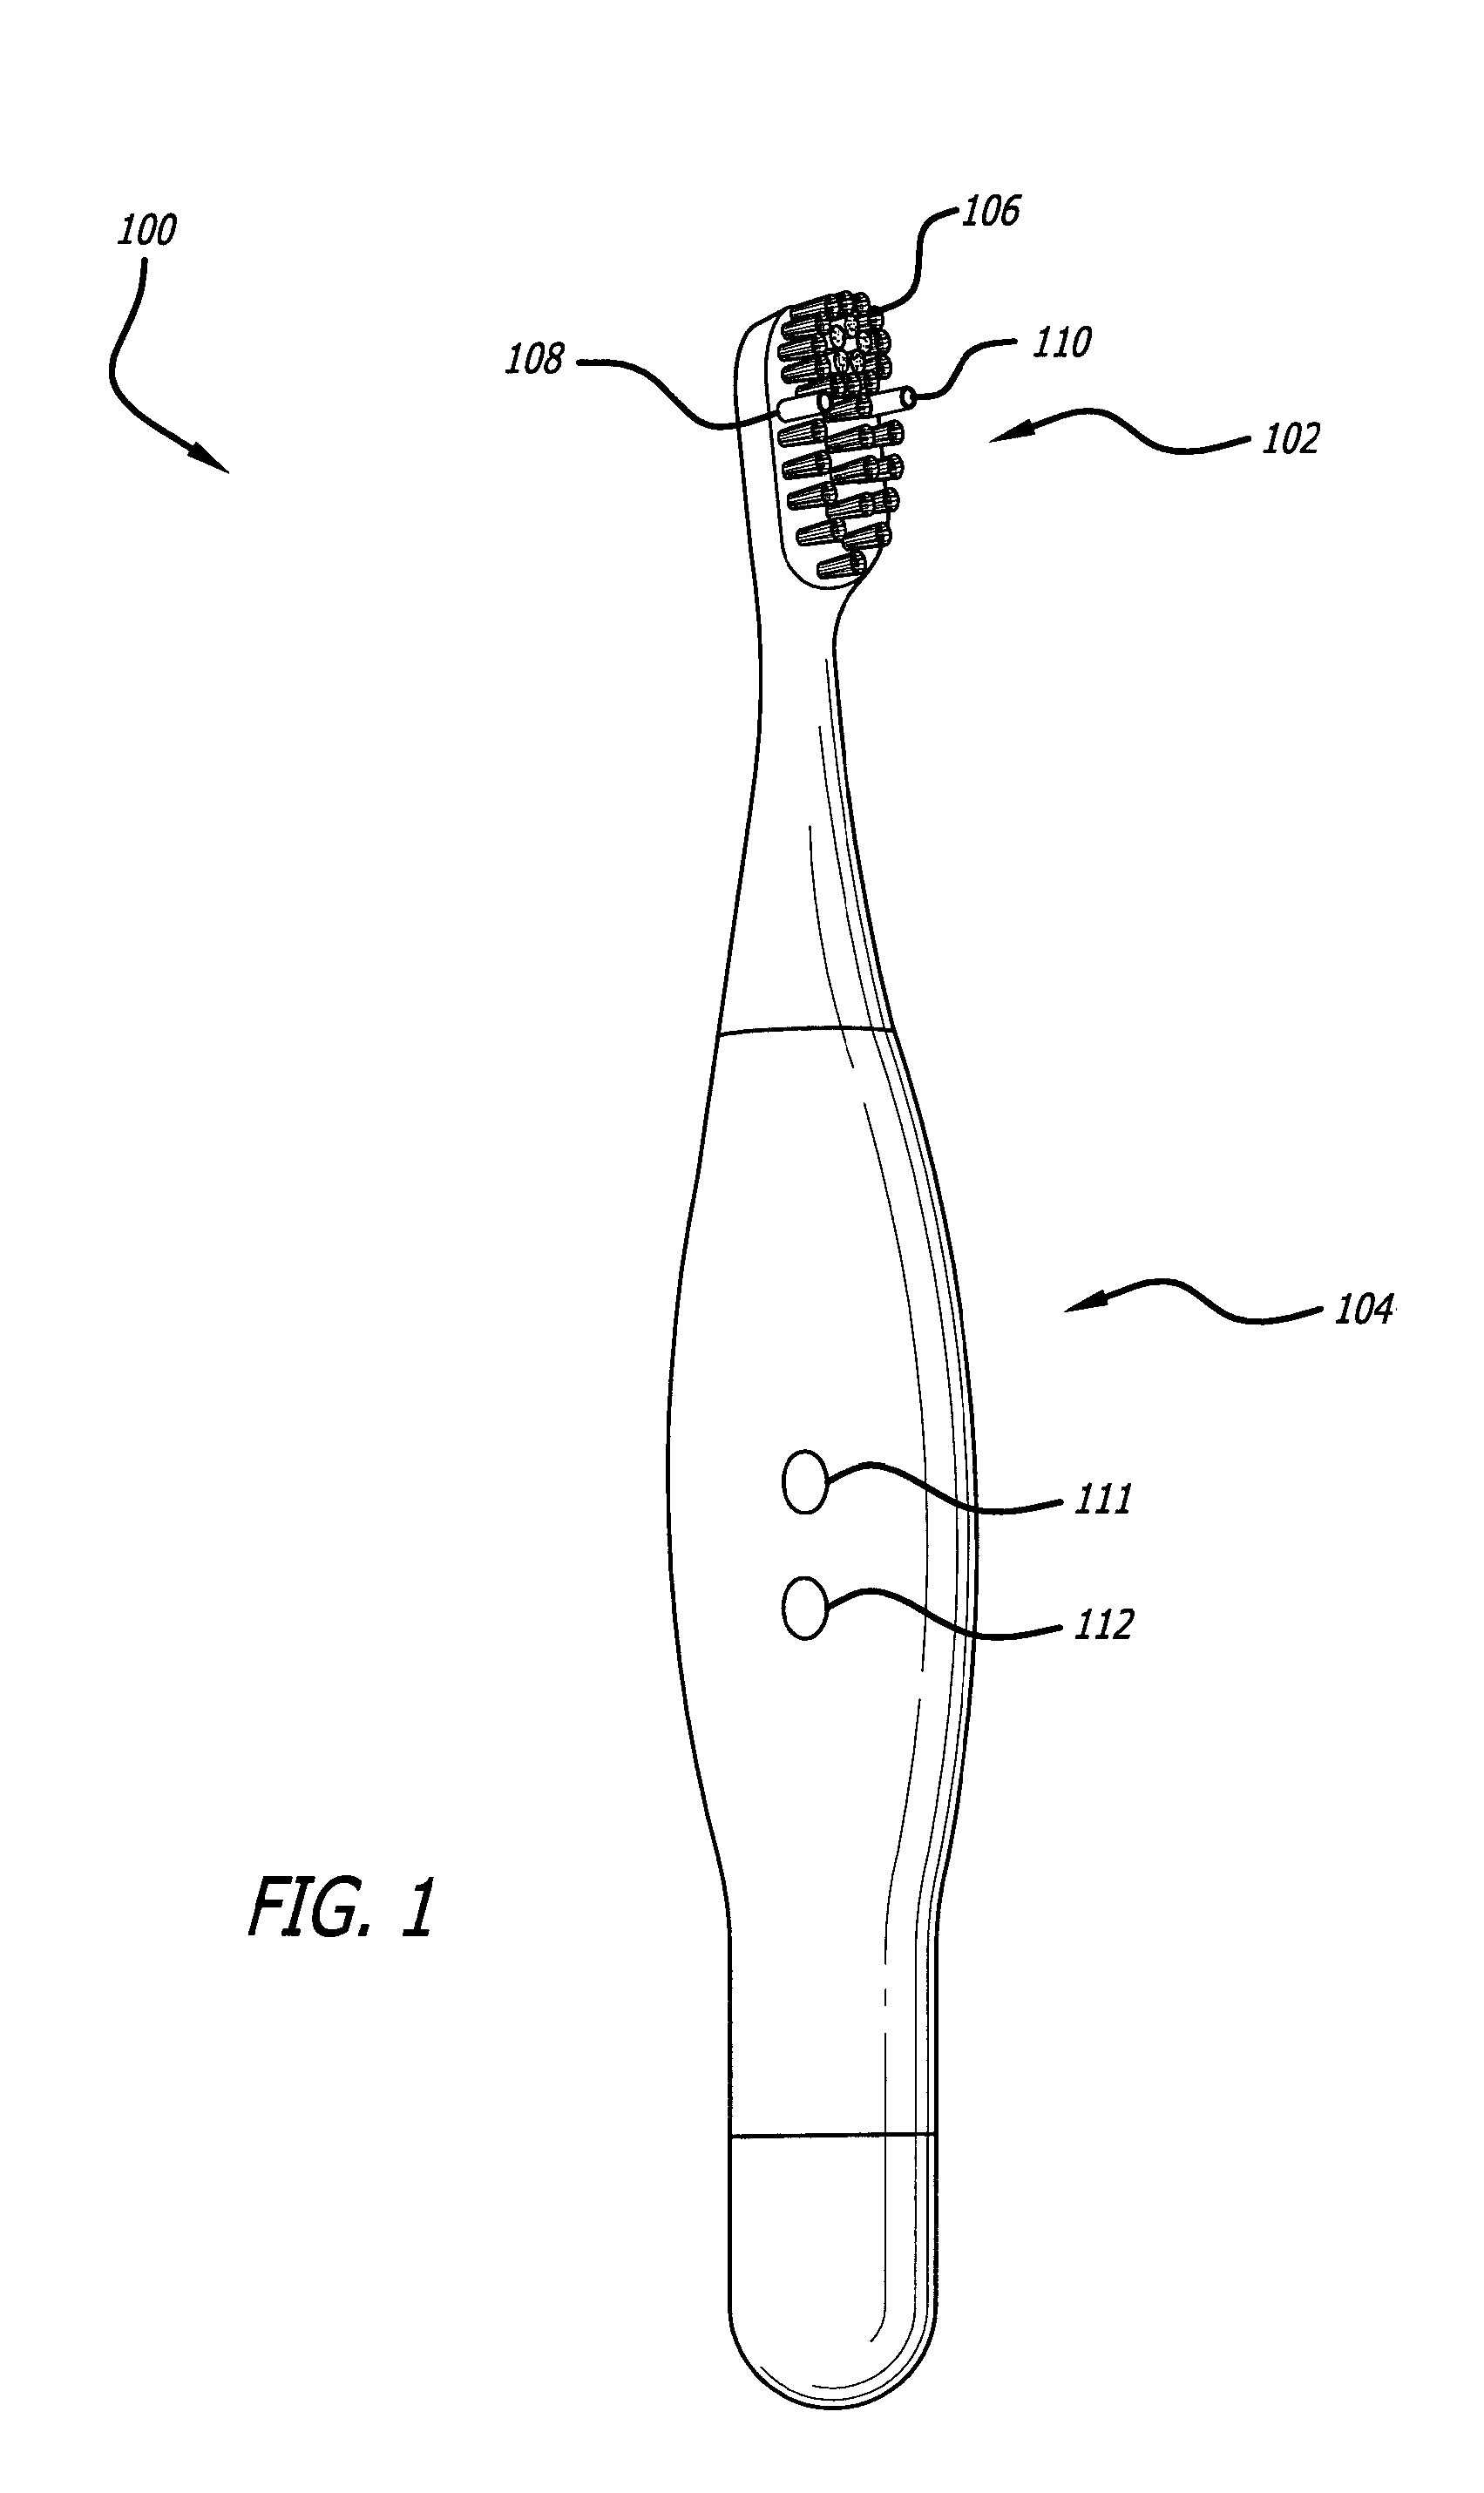 Portable Toothbrush For Delivering And Removing Fluid